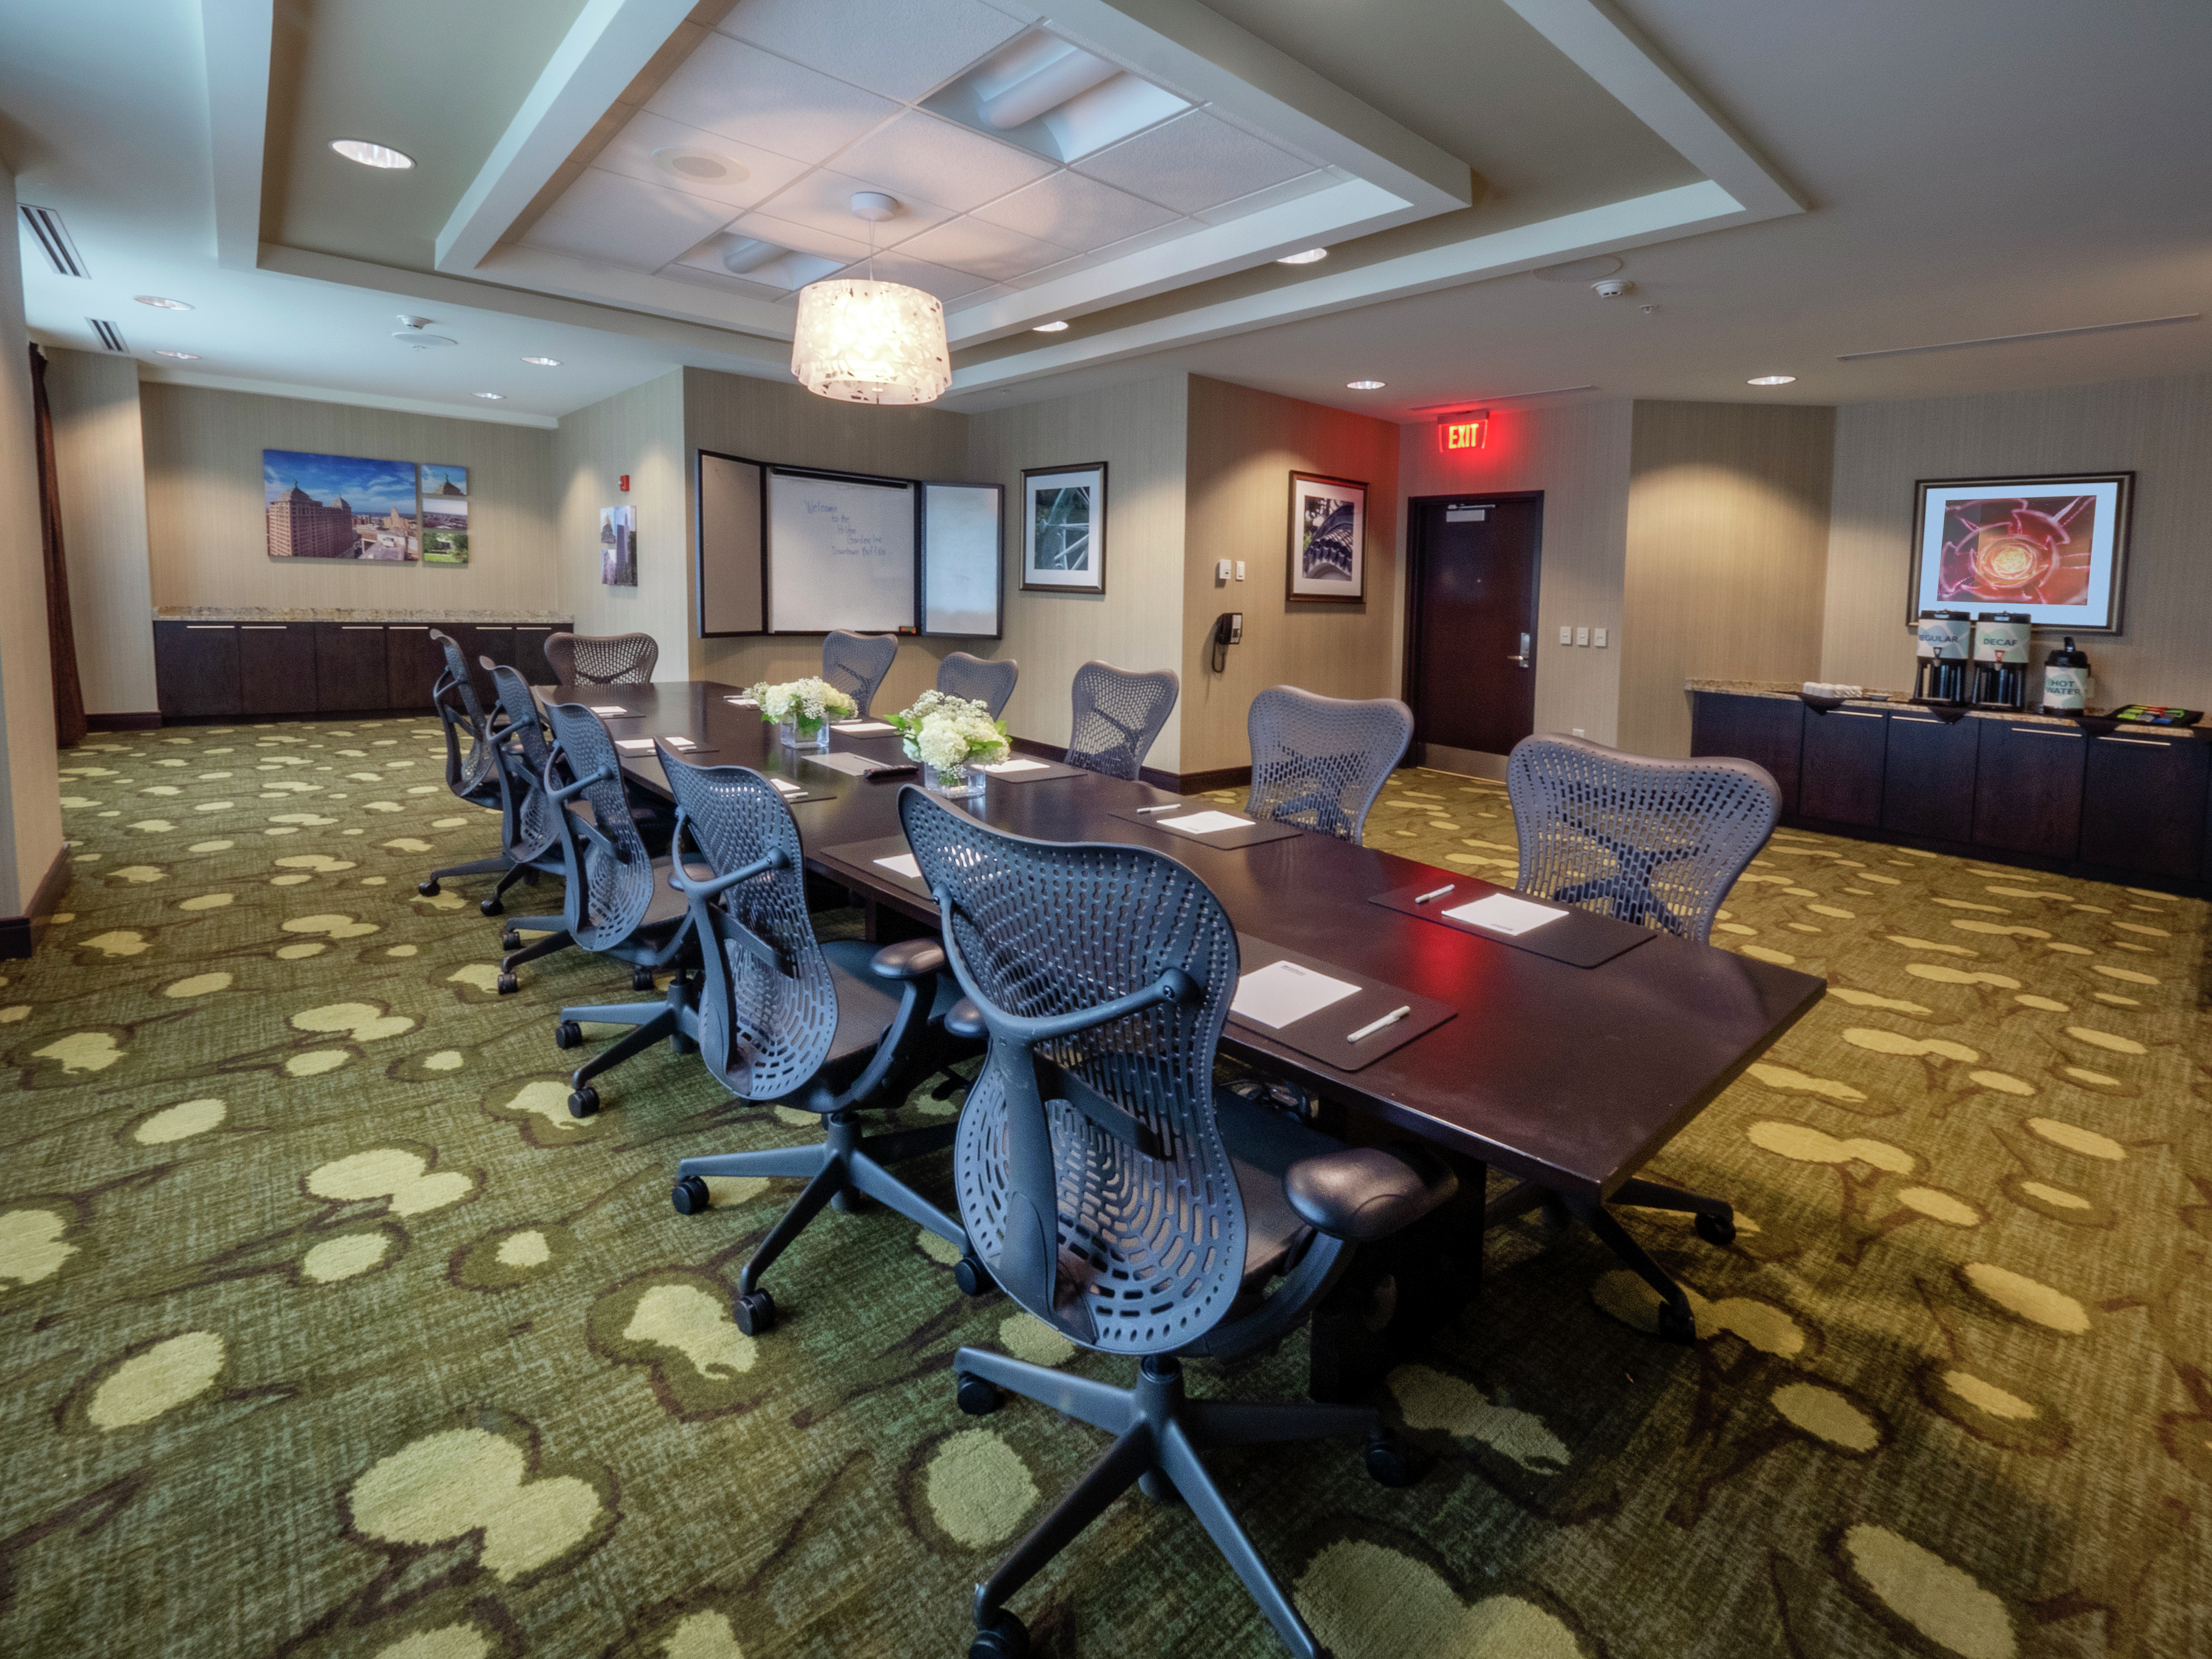 Side View of Meeting Room with Rectangular Table and Seats for 10 Guests